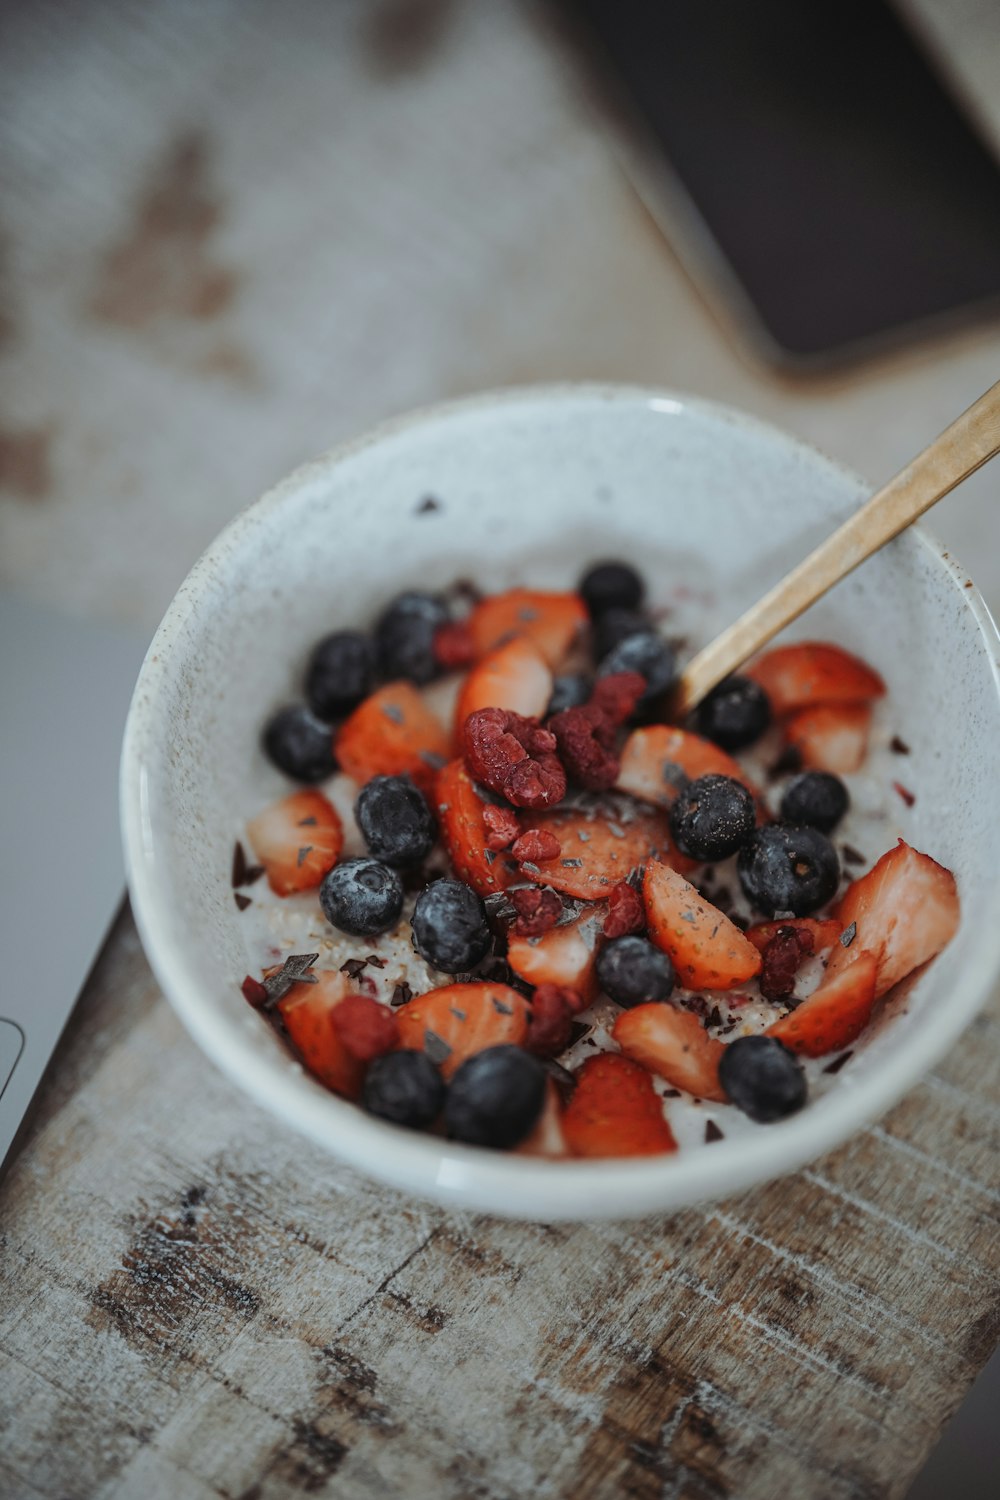 a bowl of berries and strawberries with a wooden spoon